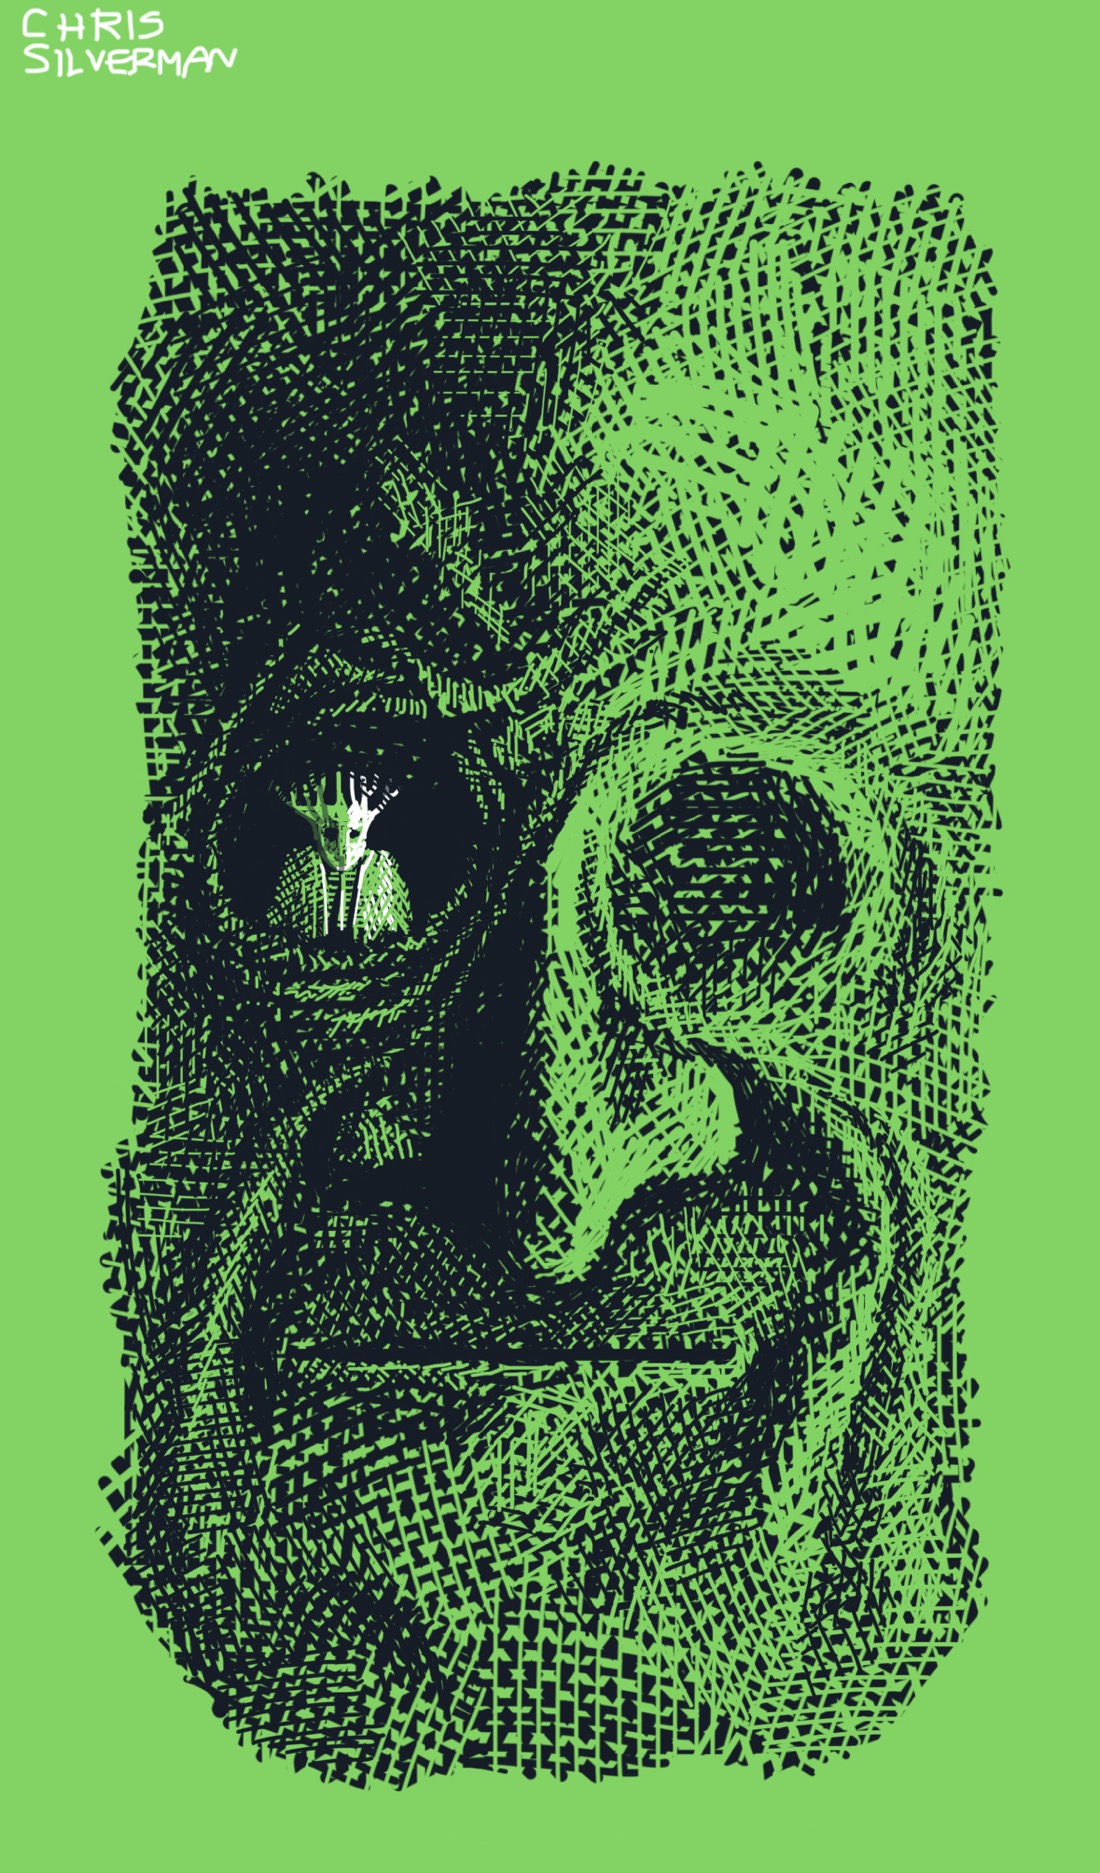 A face that appears to be carved into a rectangular block of wood or stone. The face is craggy with a hooked nose, a mouth straight as a ruler, and two round eye sockets without eyes. The left eye socket is empty; not a hole, but a circular indentation, as if you pressed a sphere into clay. The right eye socket is a round black hole, like you'd find on a mask. Sitting inside that hole, as though looking out a window, is a small figure with antlers and a suit jacket. That eye socket is surrounded by odd striations and wrinkles. The drawing is black ink on a green background.